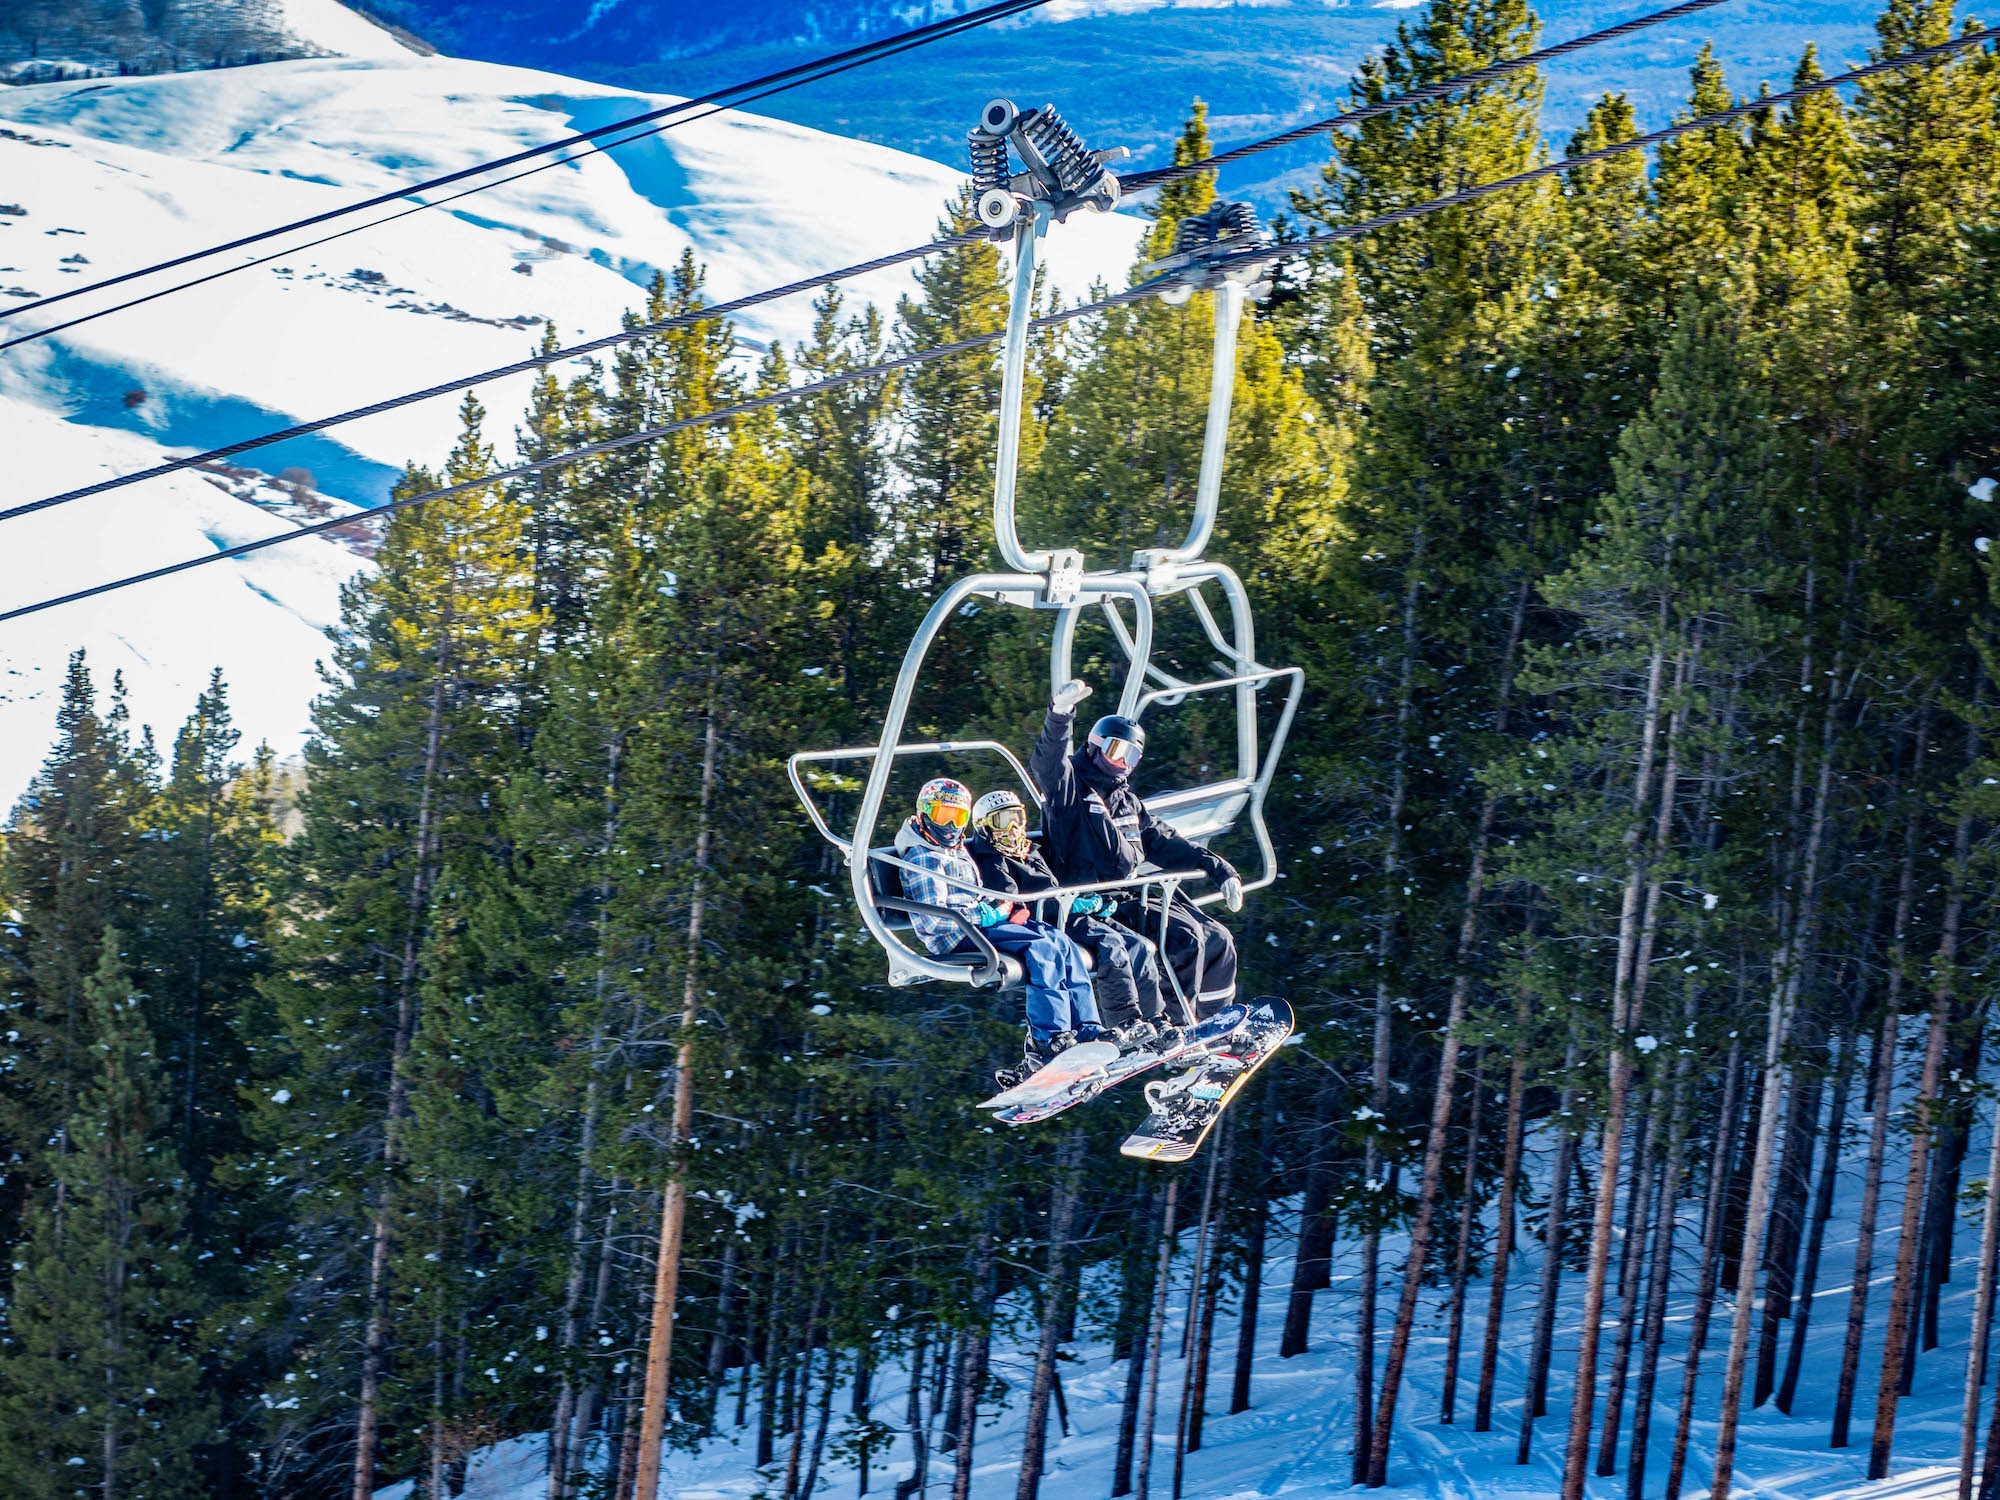 Three people riding the East River lift at Crested Butte